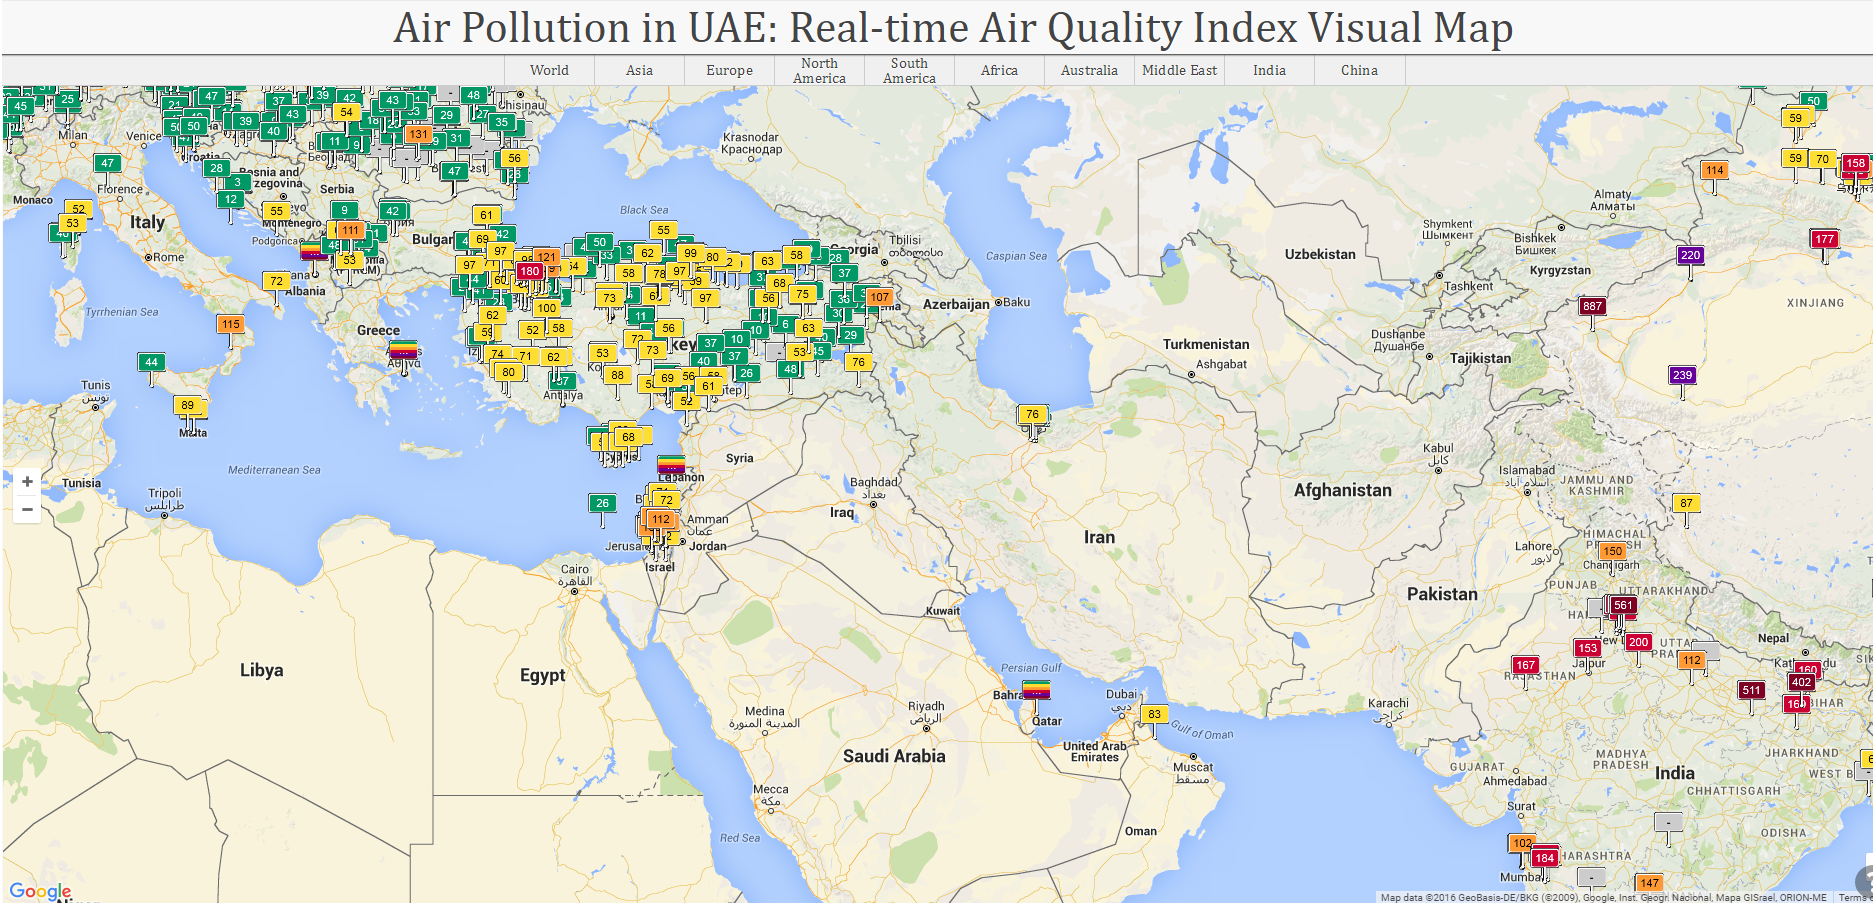 Air Pollution in UAE: Real-time Air Quality Index Visual Map.